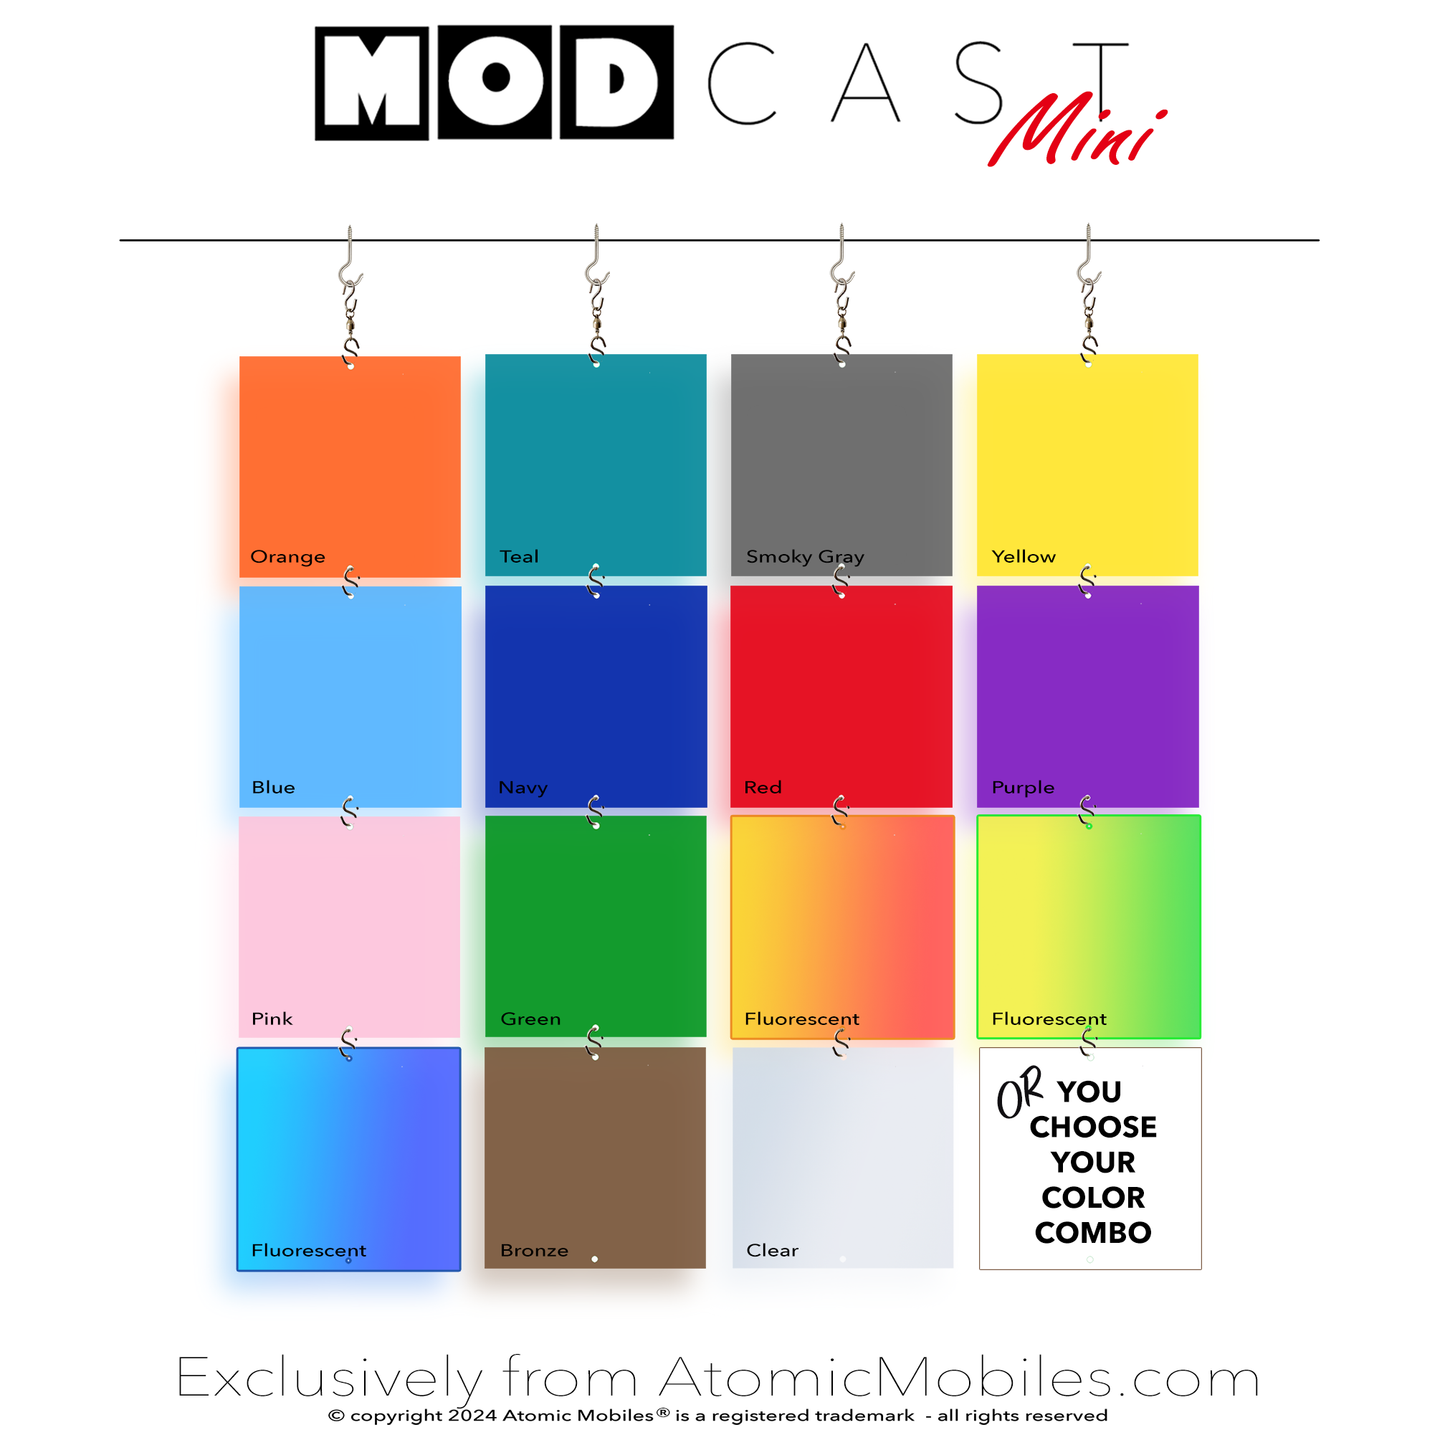 MODcast MINI squares in 16 color choices and you can choose your own - 6x6 inch squares for mid century modern style home decor by AtomicMobiles.com